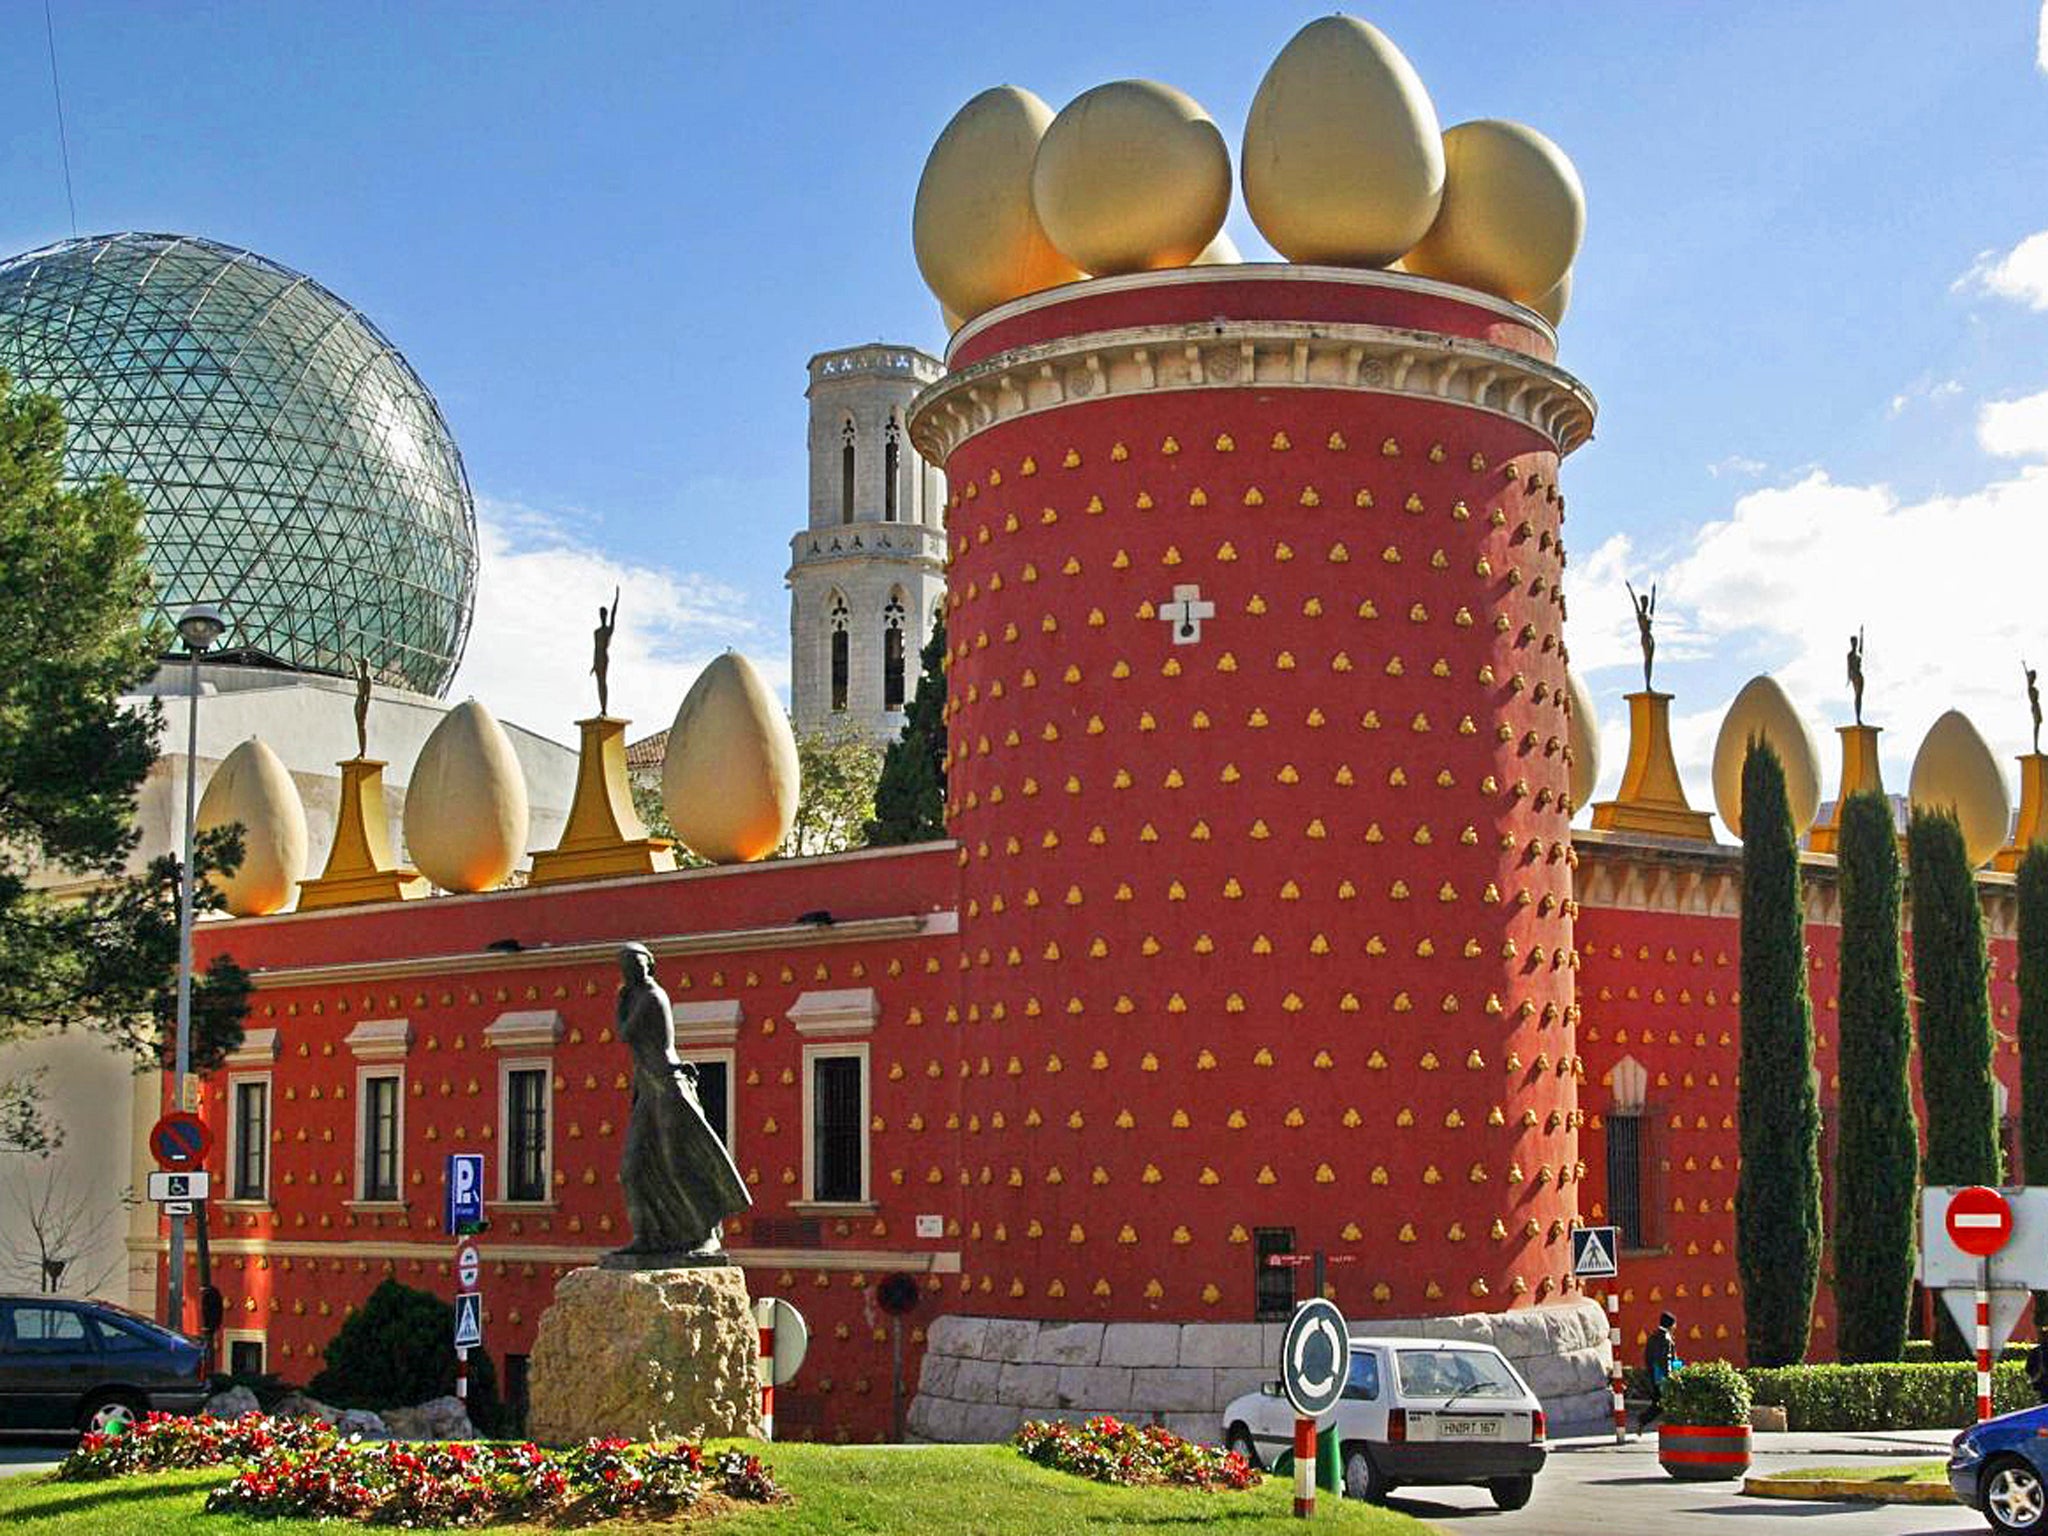 Egg-citing: the unforgettable Dalí Museum